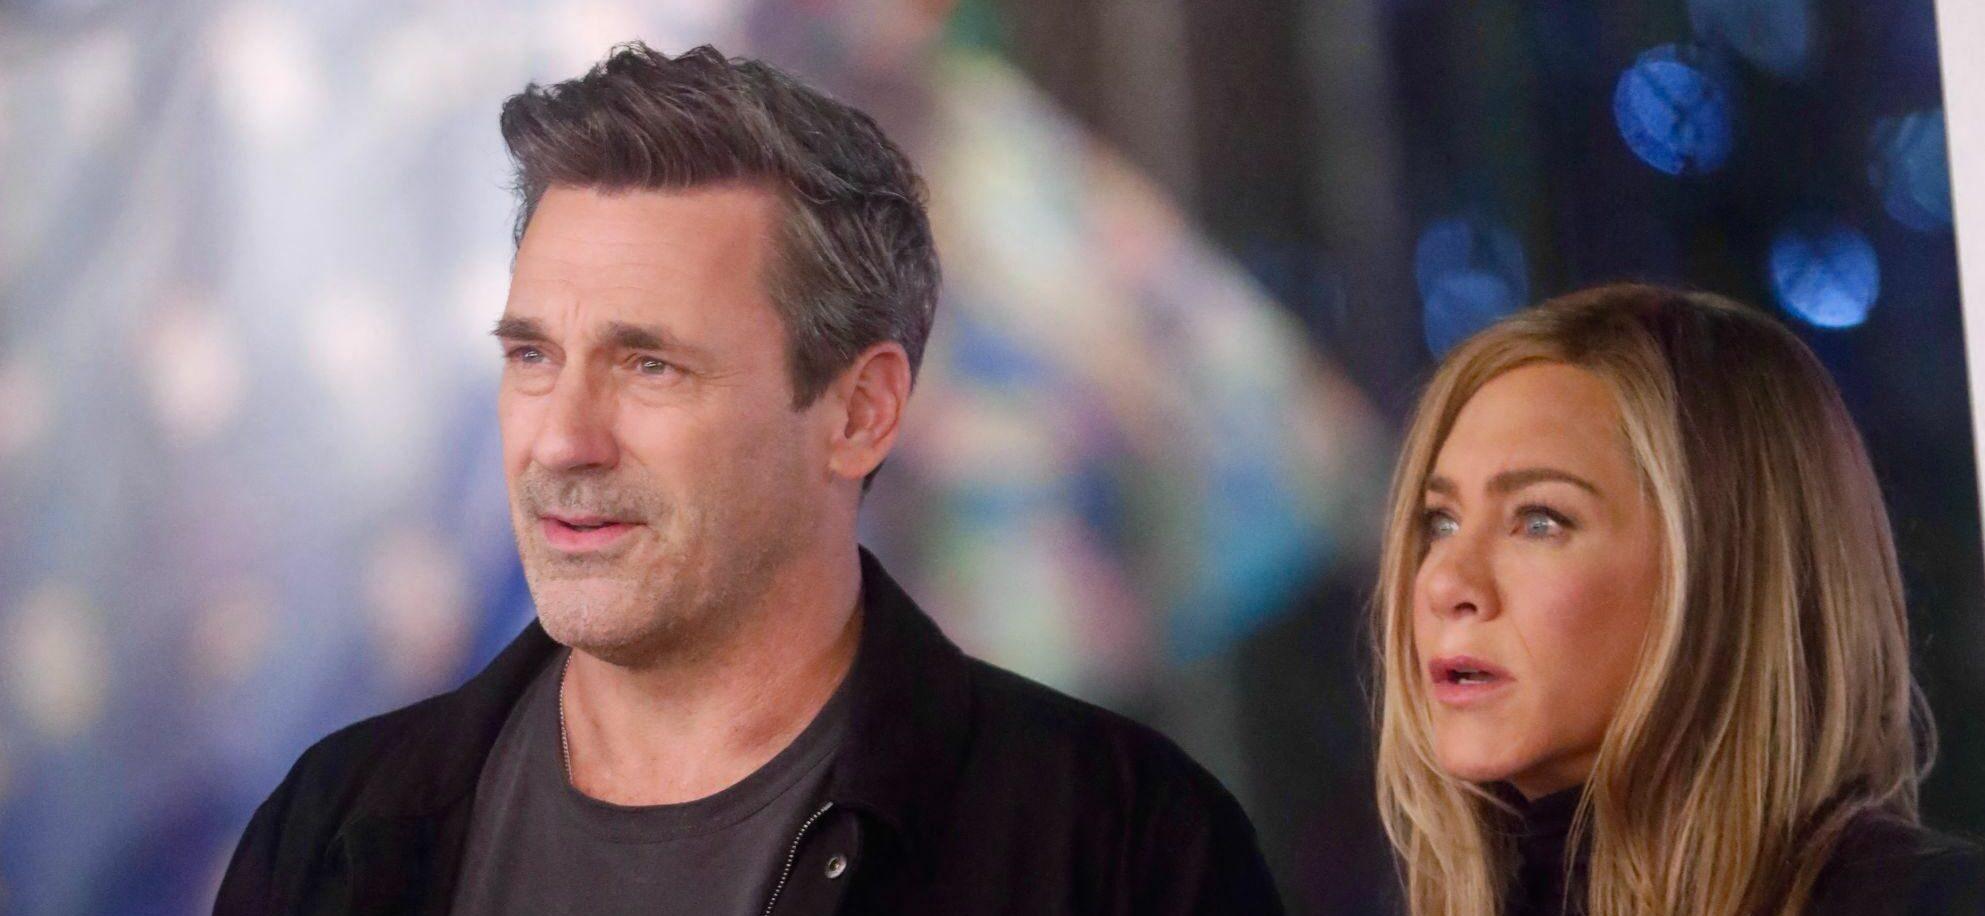 Jennifer Aniston and Jon Hamm filming The Morning Show in NYC